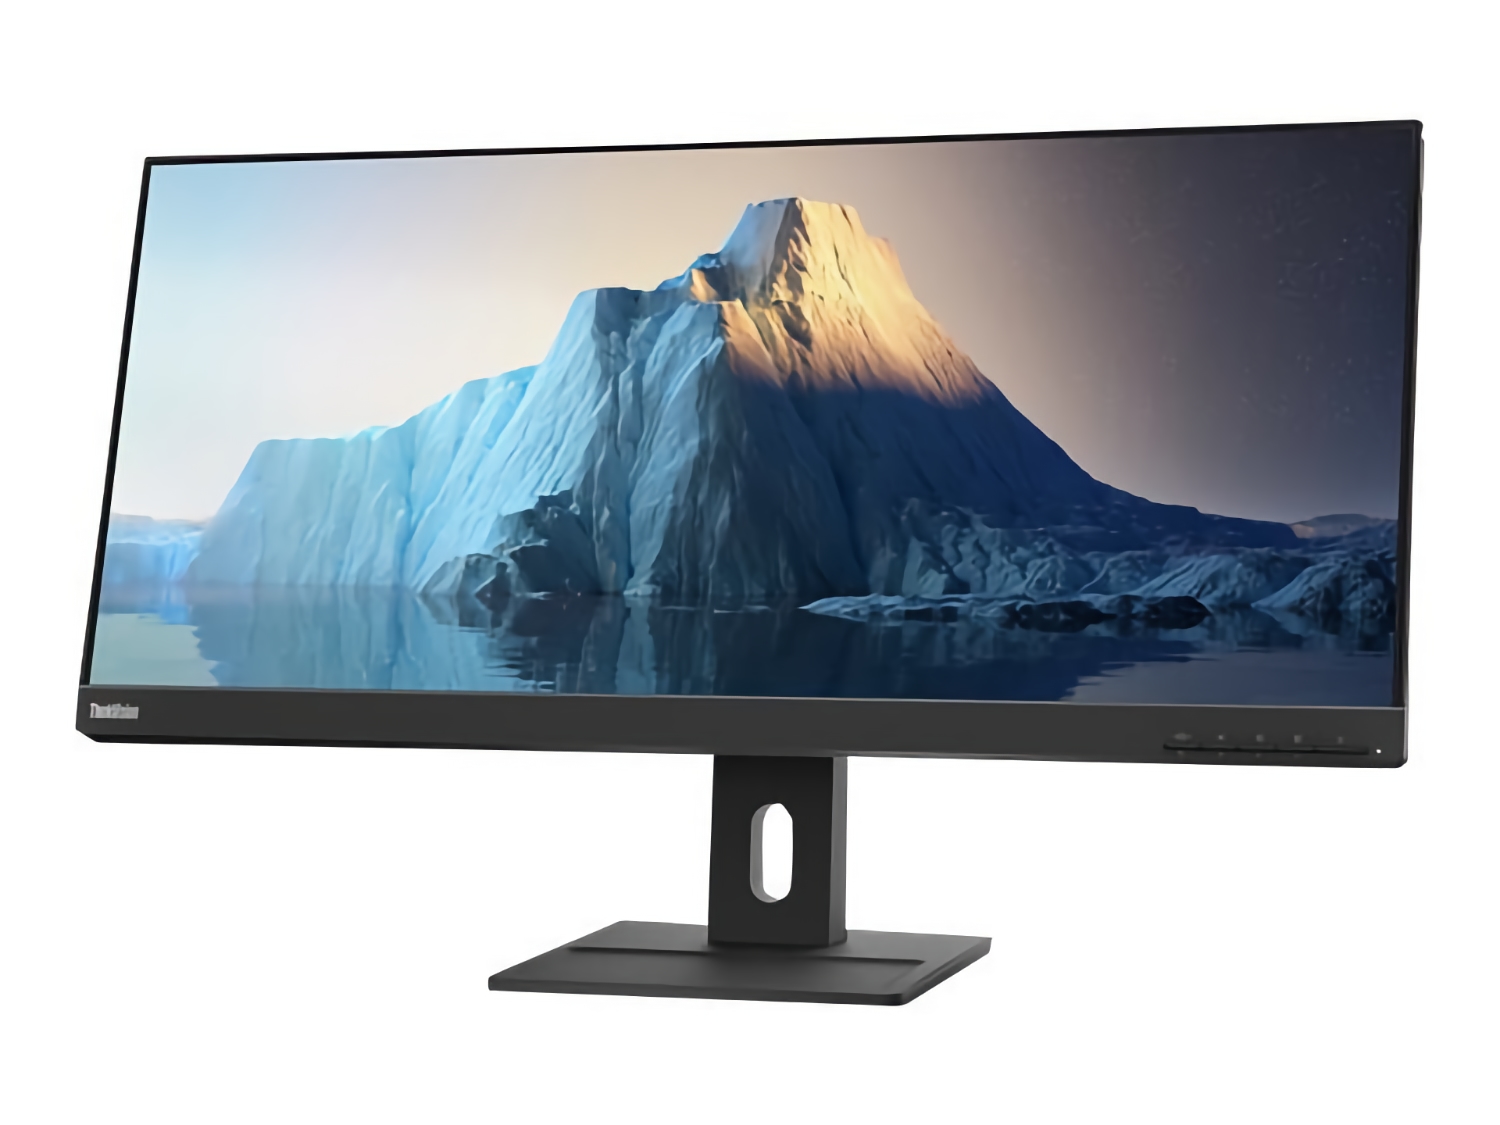 Lenovo Introduces Thinkvision E29w-20 LED: 29-inch 90Hz IPS Widescreen Monitor